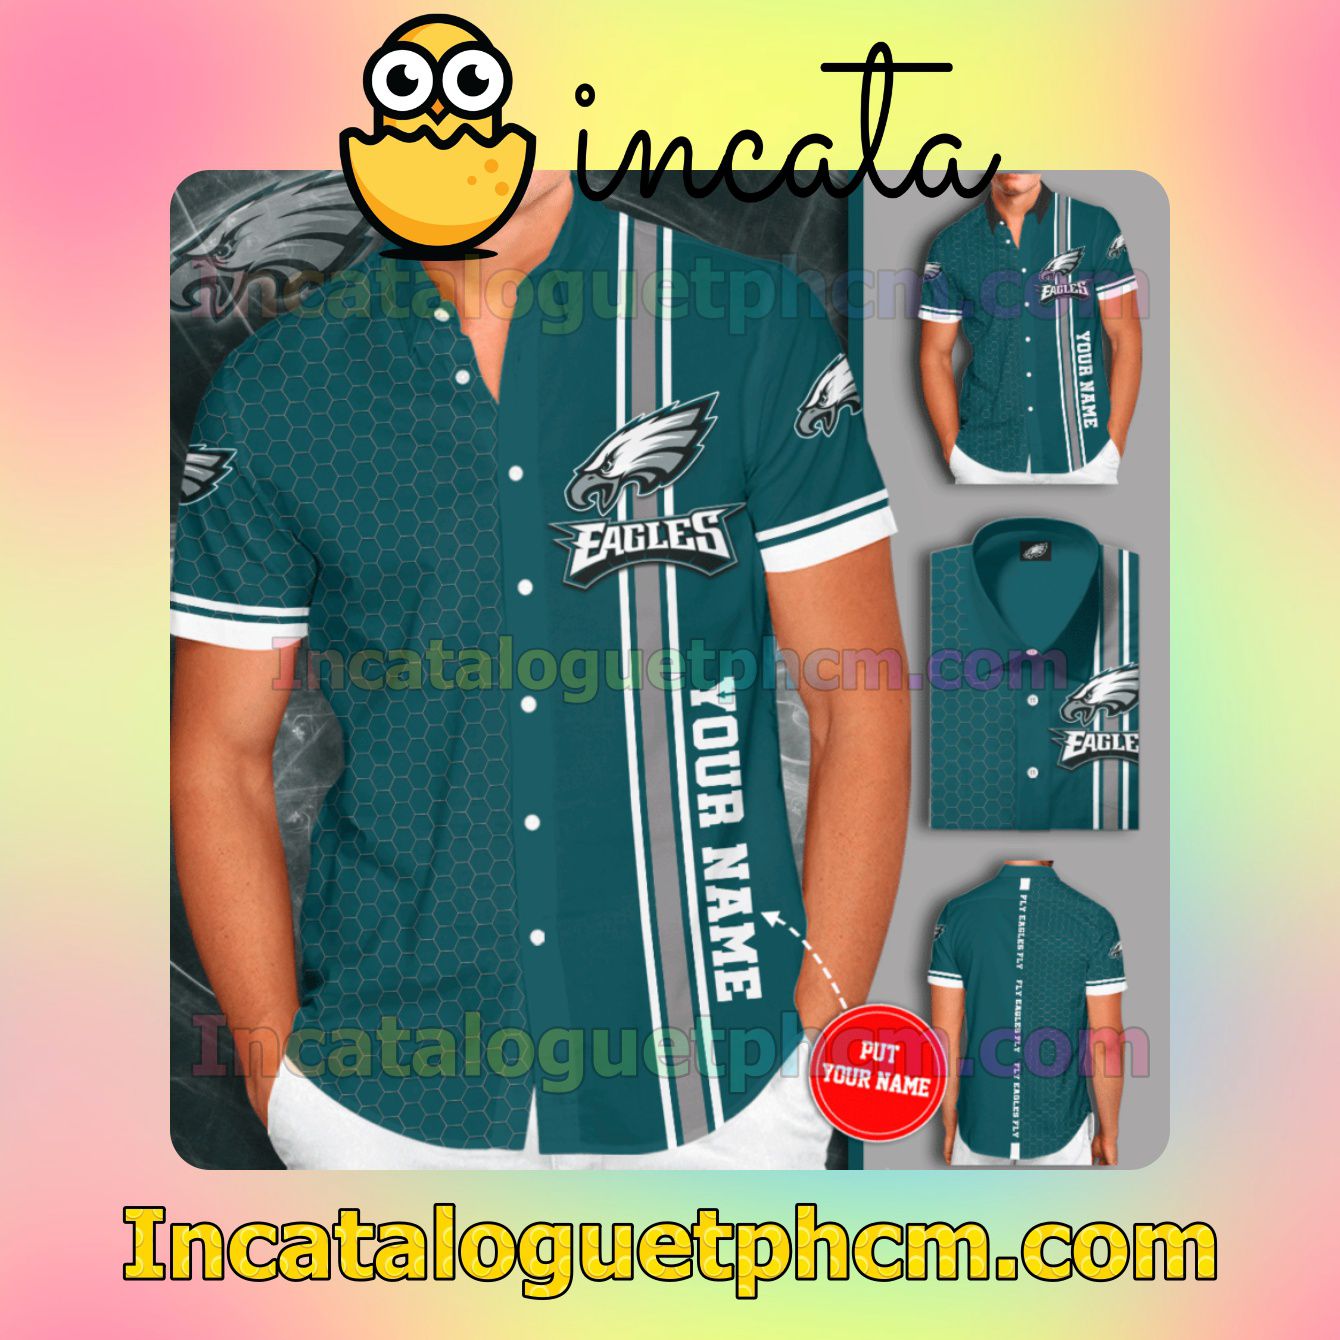 Personalized Philadelphia Eagles Tiling Teal Button Shirt And Swim Trunk